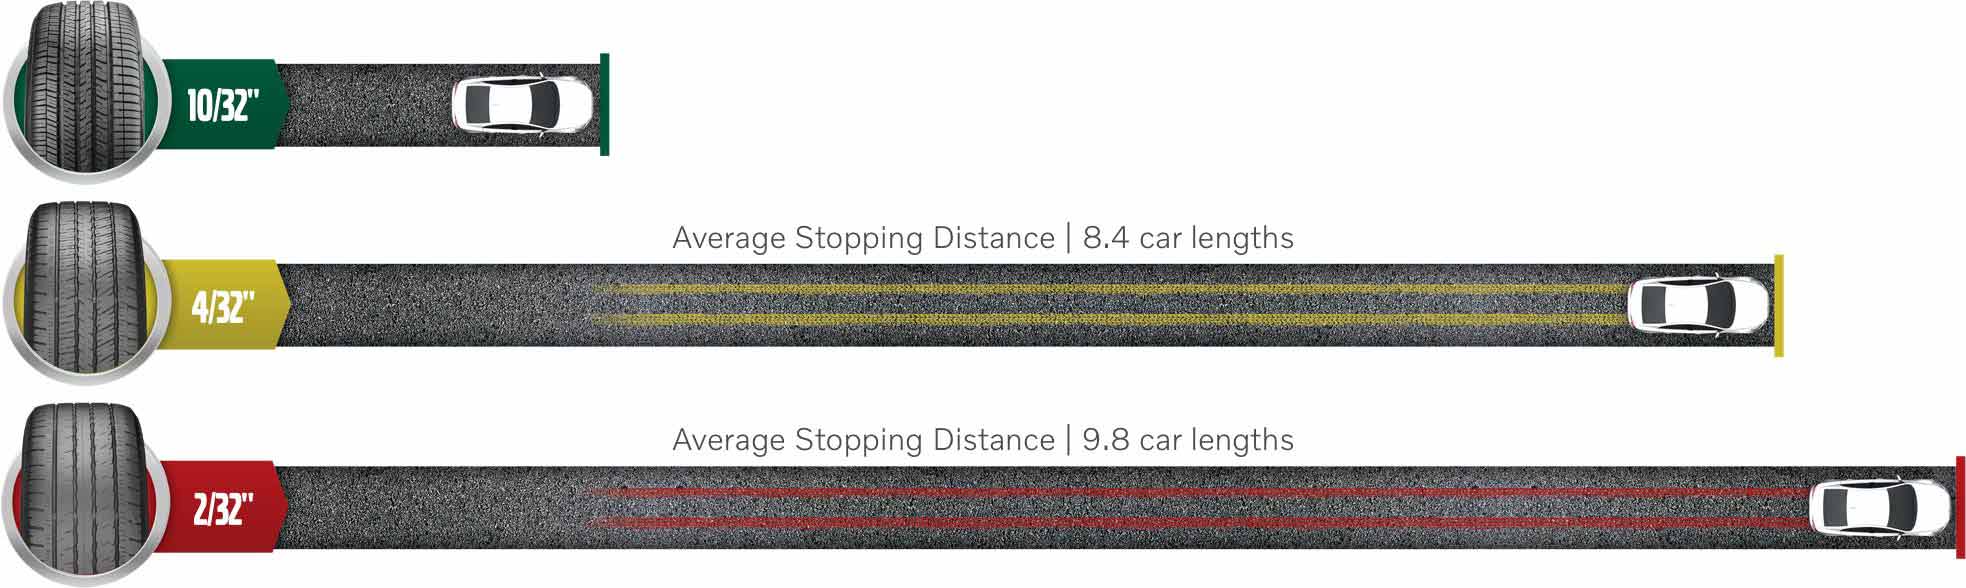 Image demonstrating the difference in stopping distance between old tires and new tires. New tires stop much sooner than tires that have been worn down